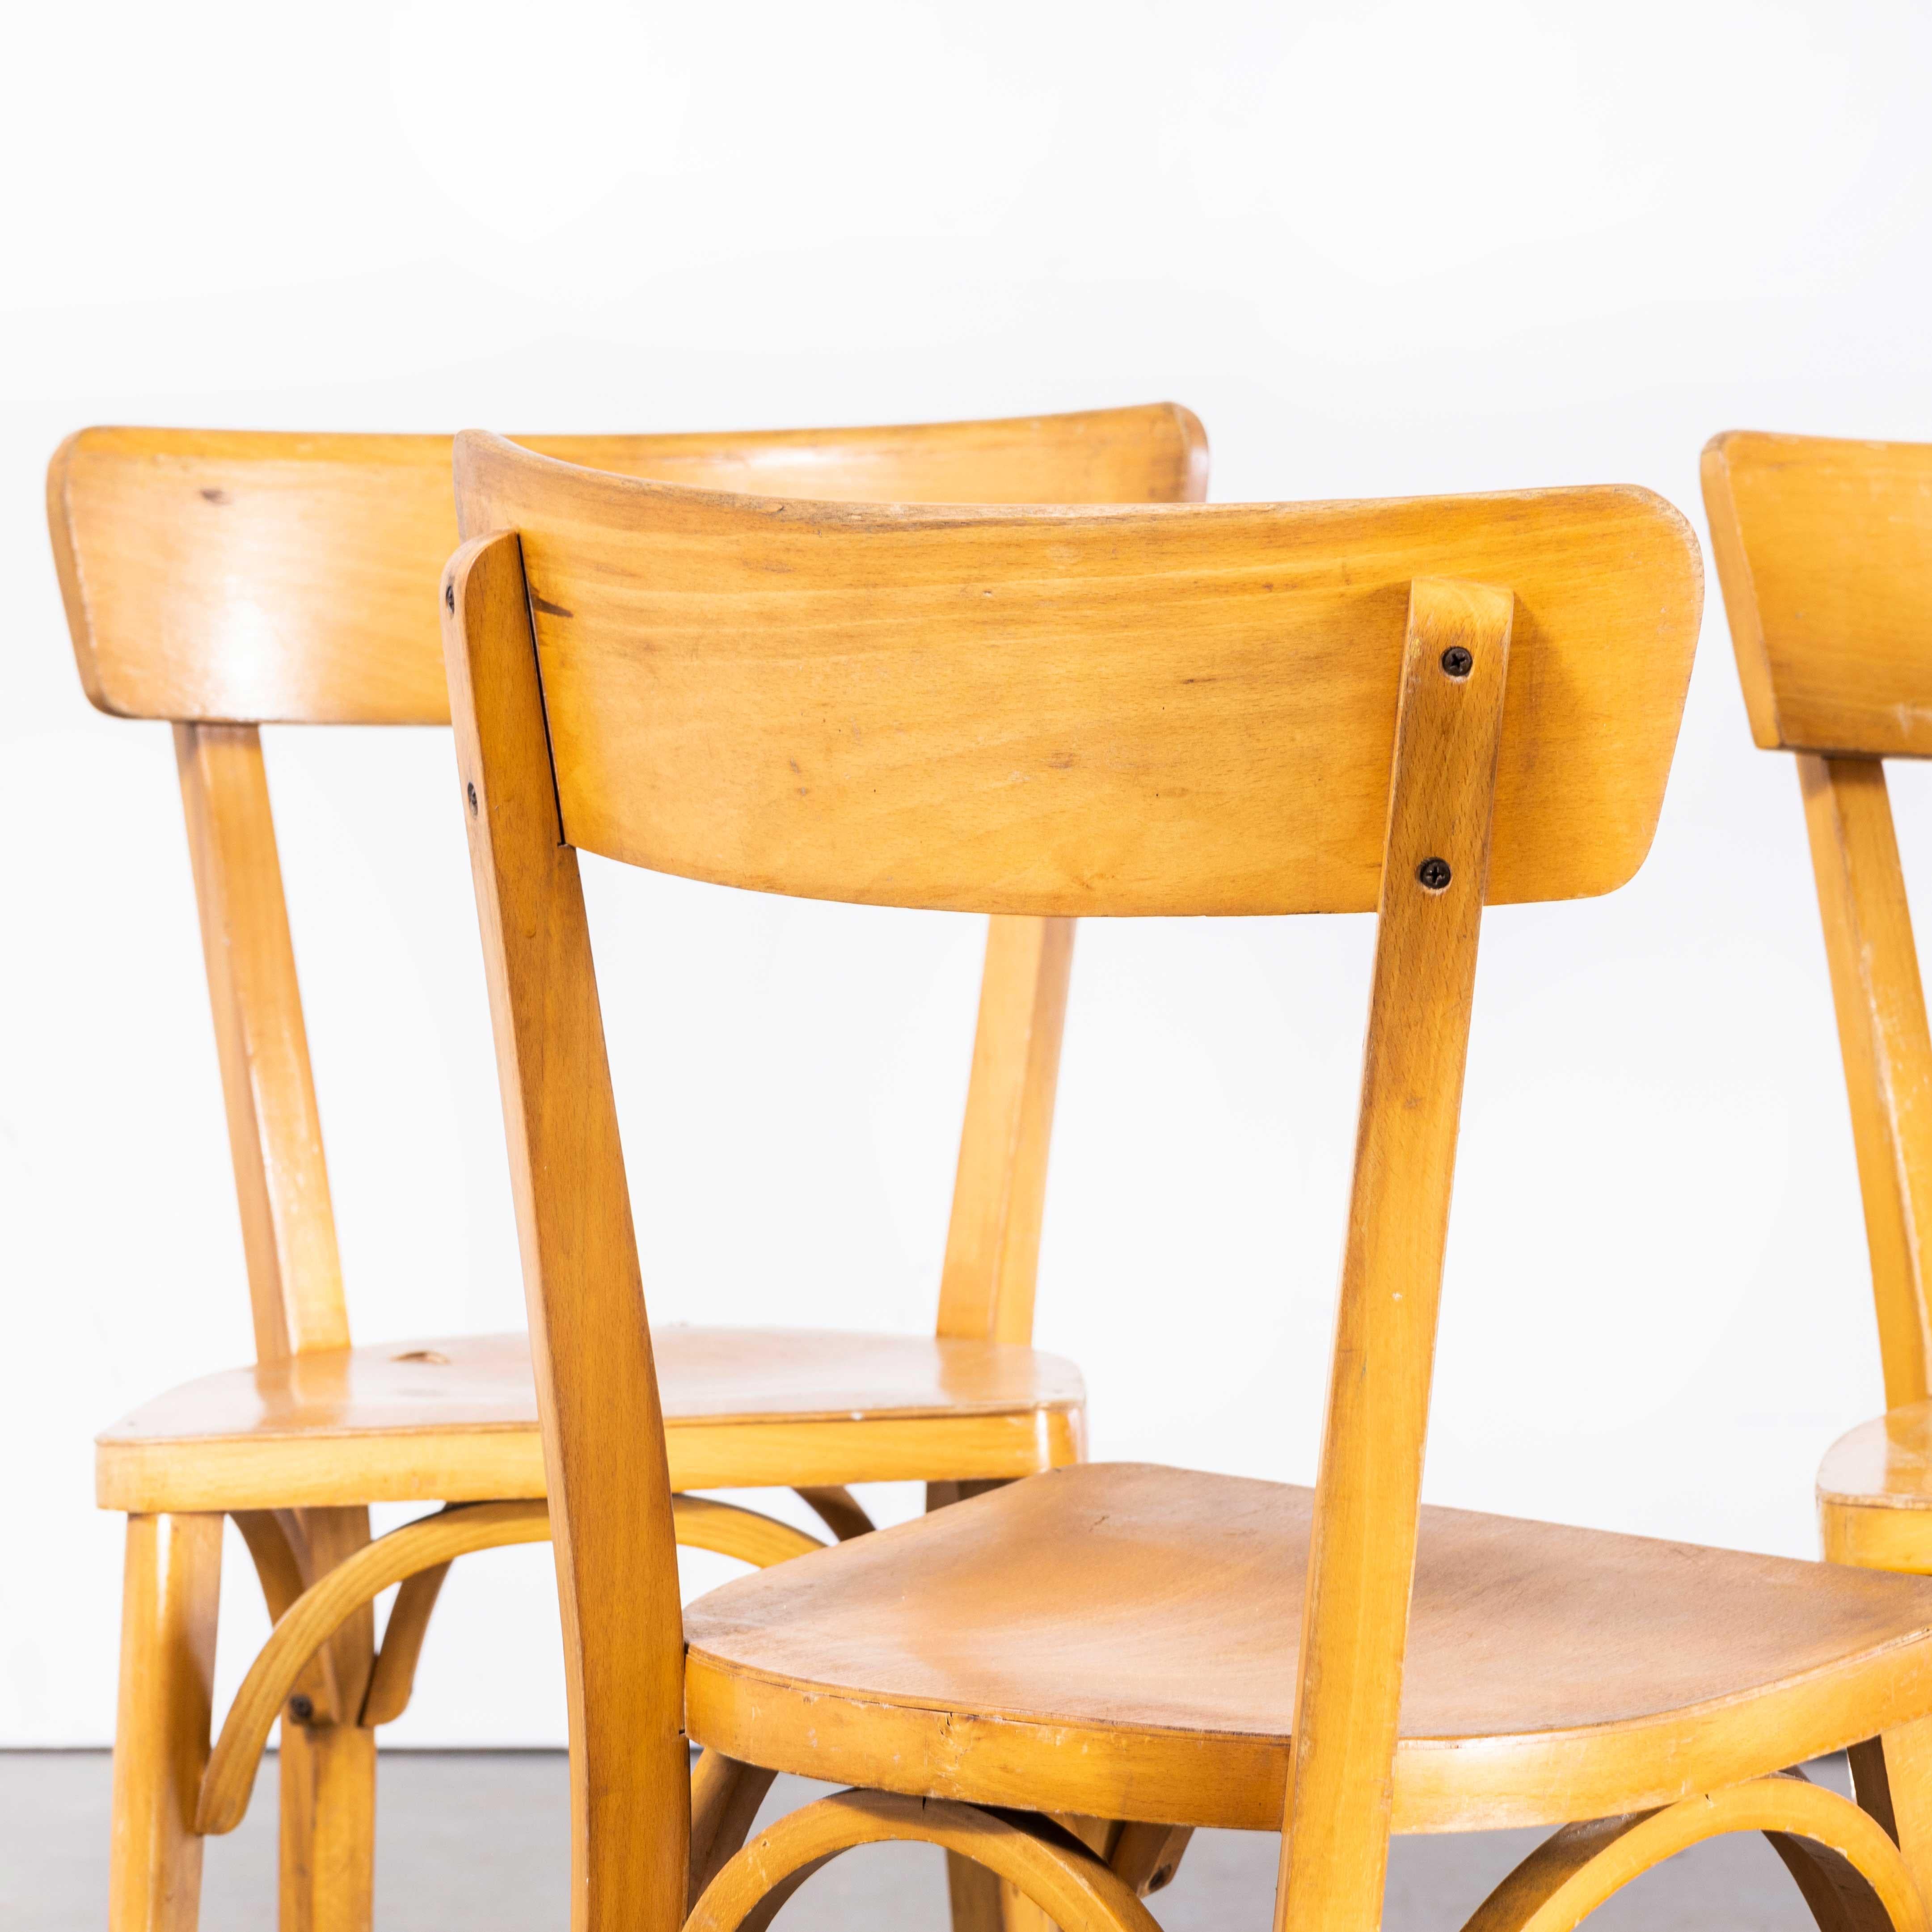 1950s French Baumann Blonde Beech Bentwood Dining Chairs – Various Quantities Available
1950s French Baumann Blonde Beech Bentwood Dining Chairs – Various Quantities Available. Baumann is a slightly off the radar French producer just starting to